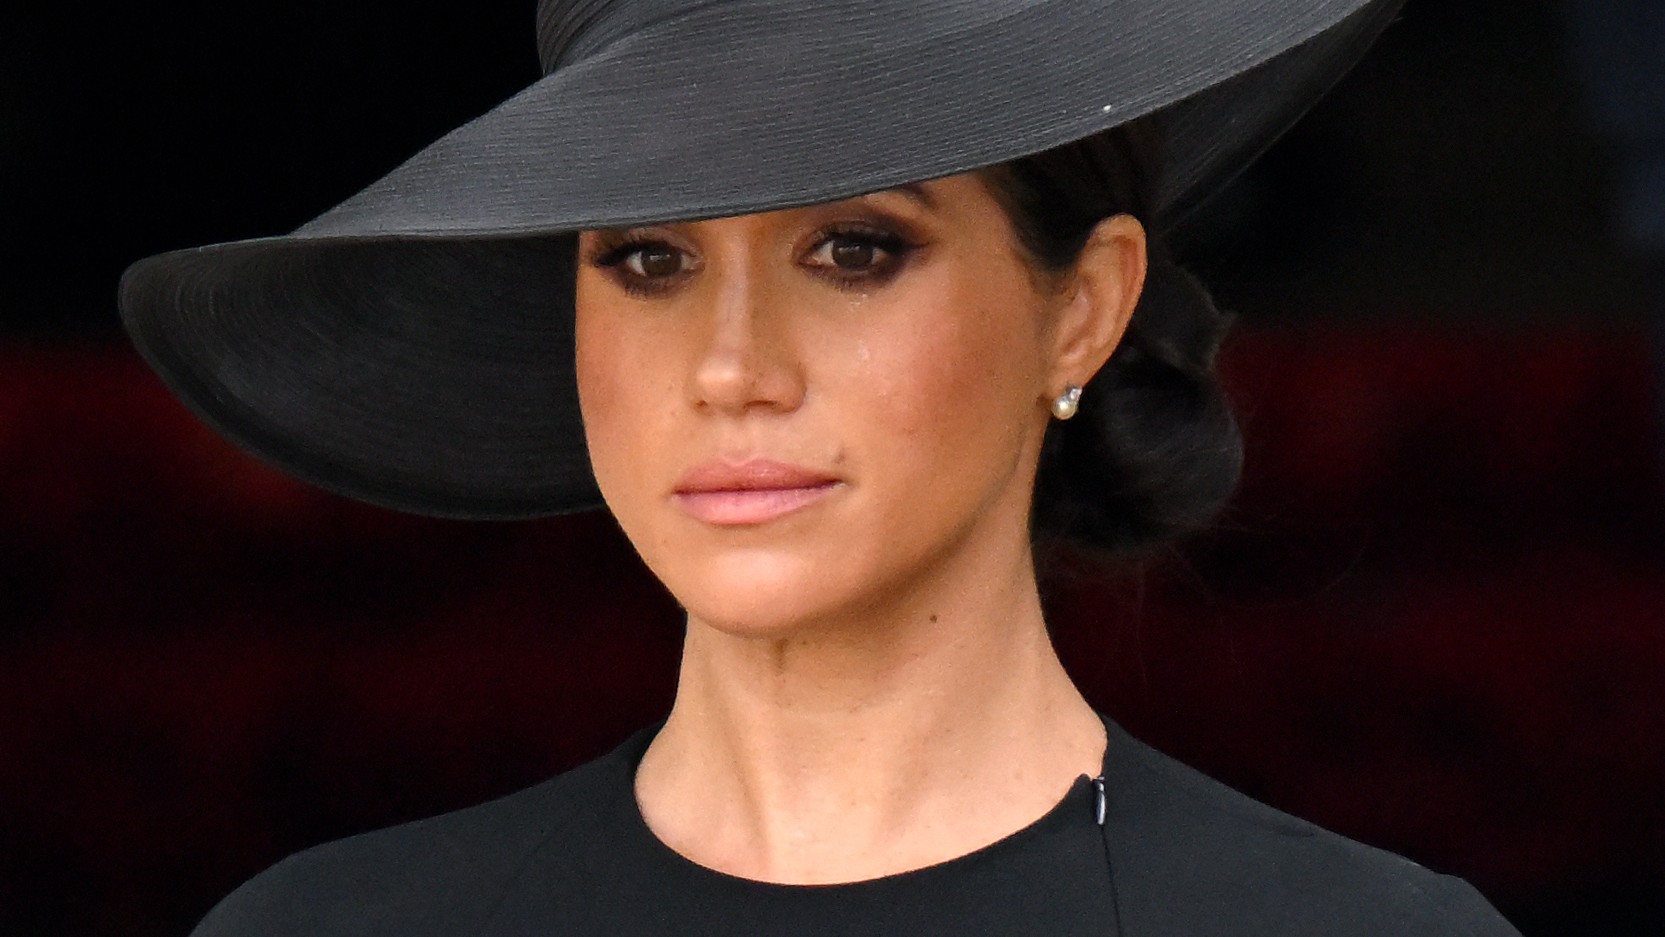 Meghan Markle Reportedly Sent Letter to King Charles III Asking to Meet One-on-One